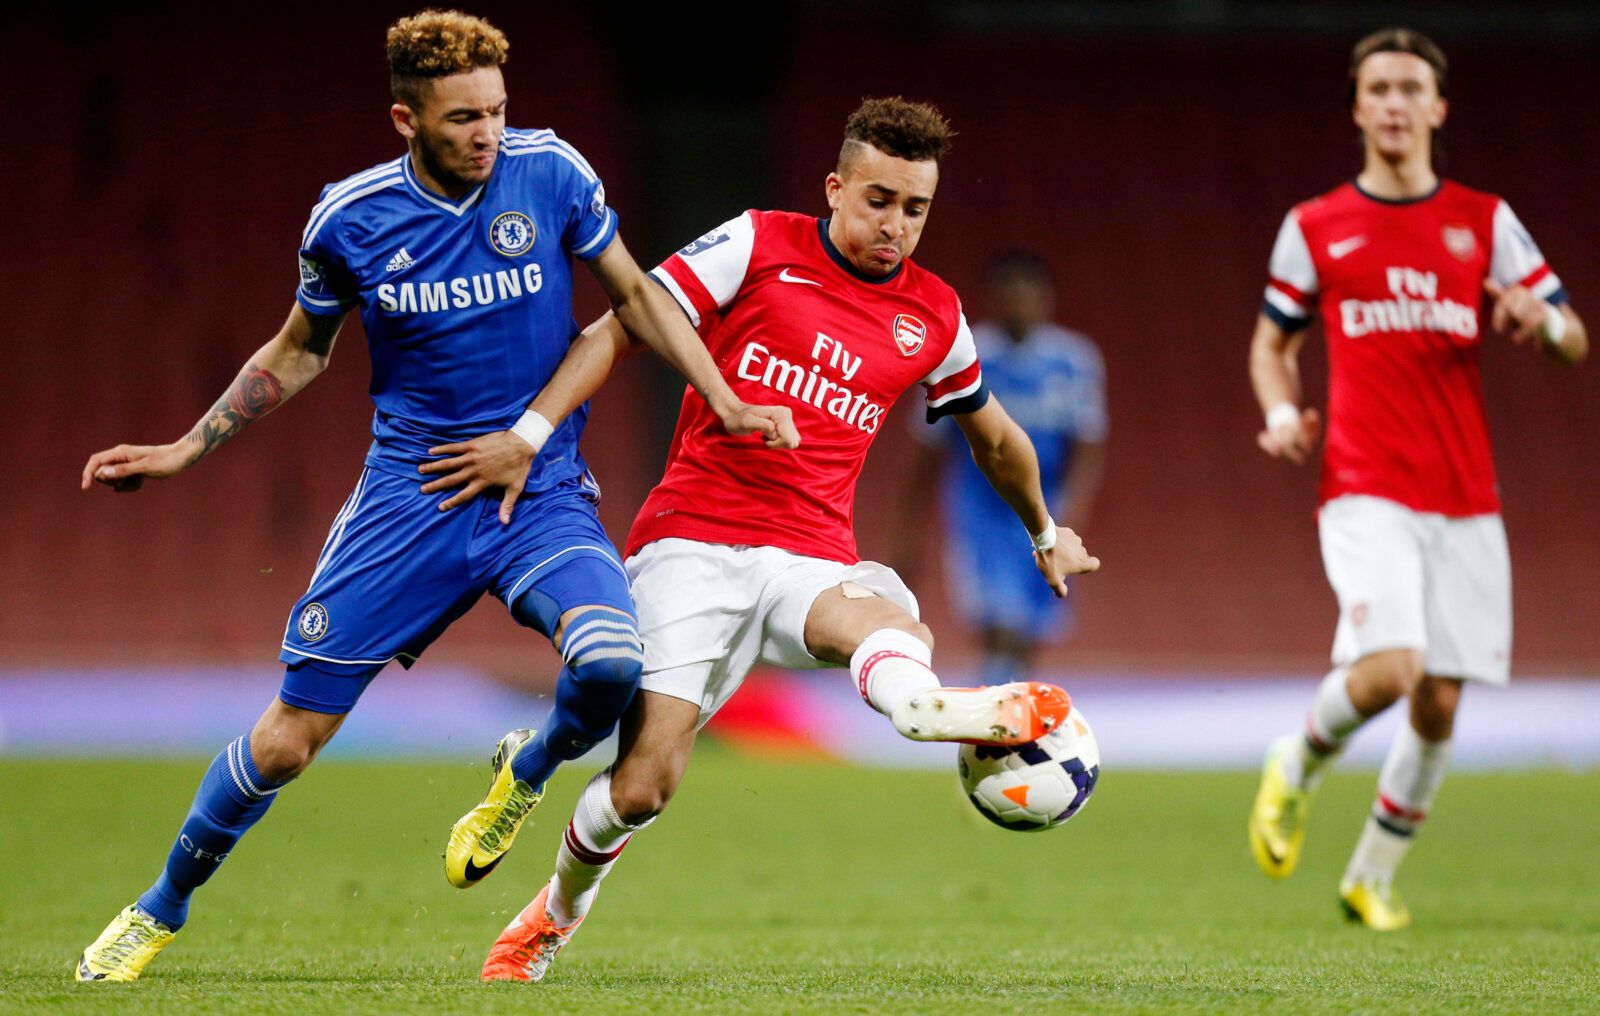 Football - Arsenal v Chelsea - Barclays Under 21 Premier League - Emirates Stadium - 22/4/14 
Brandon Ormonde Ottewill of Arsenal (R) in action with Alex Kiwomya of Chelsea 
Mandatory Credit: Action Images / Paul Harding 
Livepic 
EDITORIAL USE ONLY.